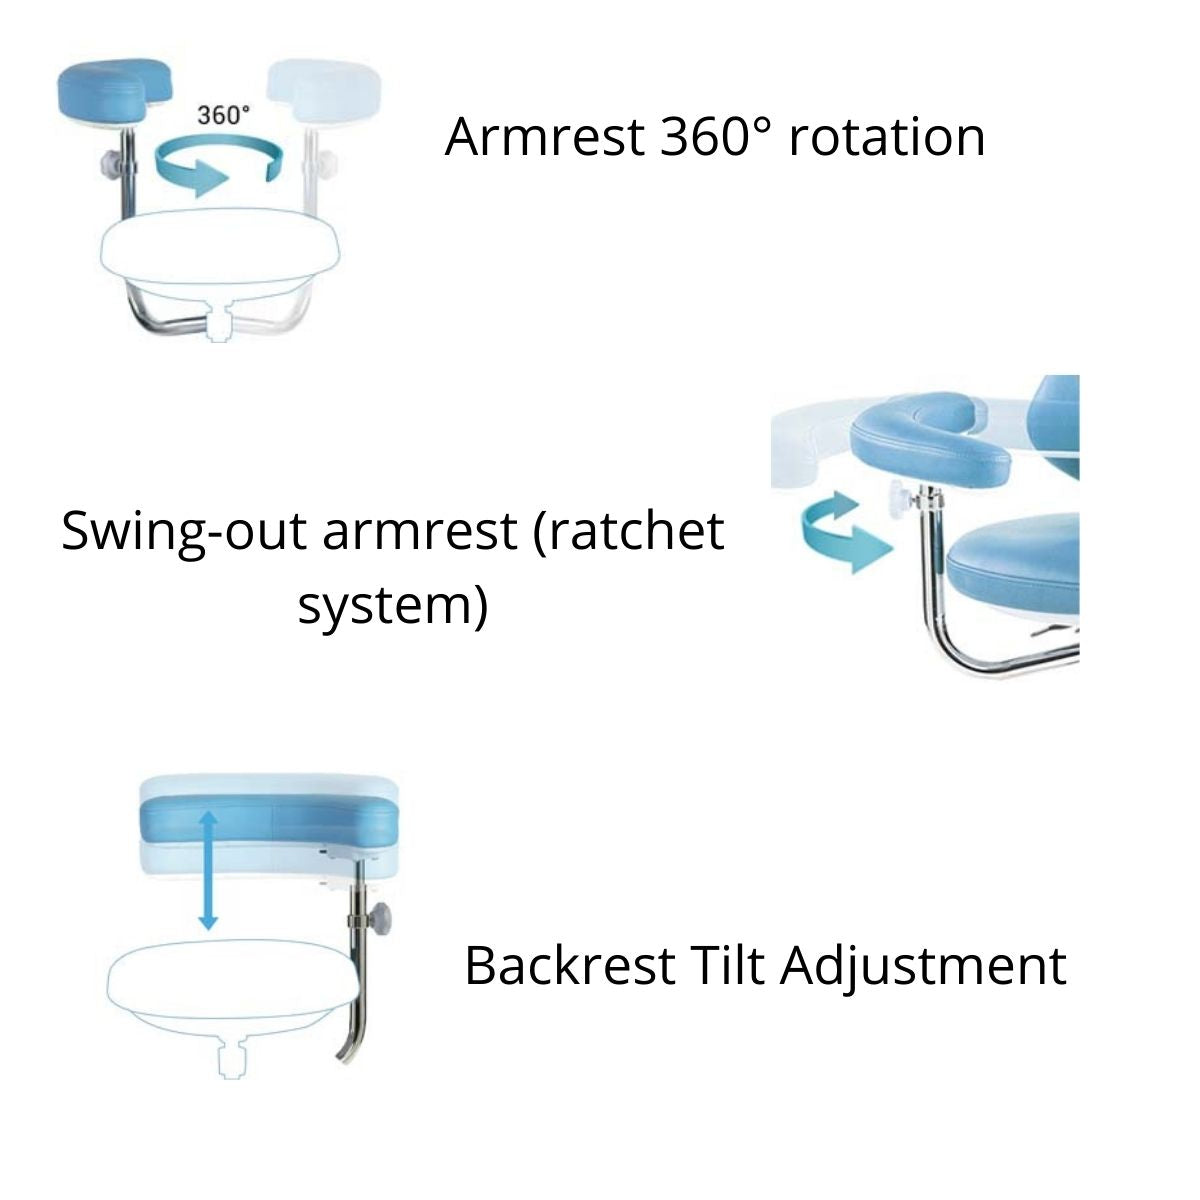 Ratchet System 360 Degree Rotatable Armrest for Sit Healthier Chair | Sit Healthier